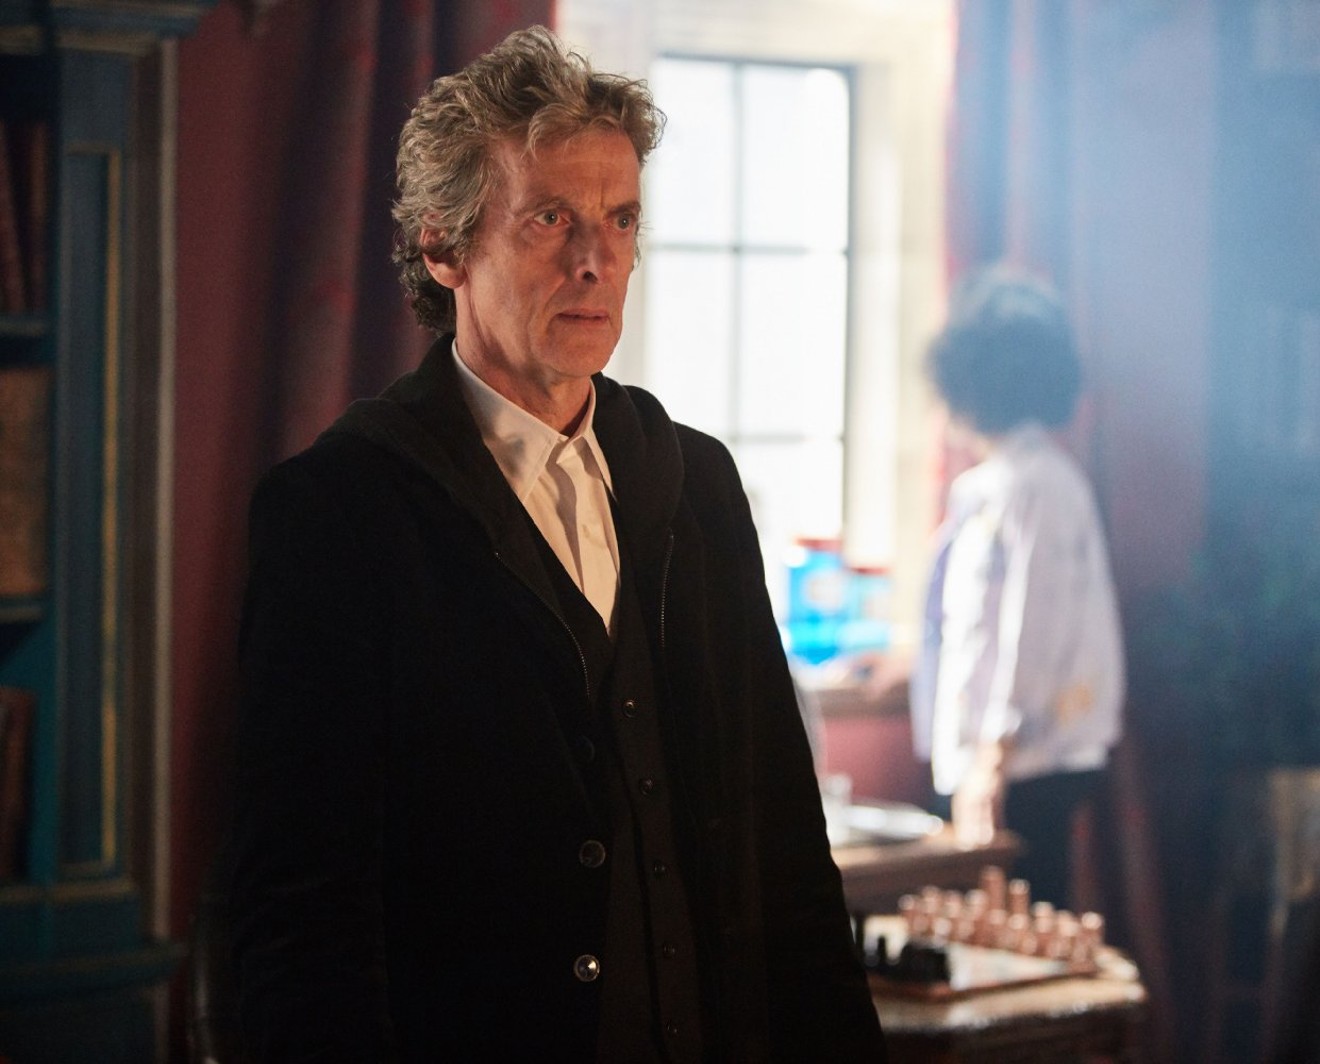 Peter Capaldi as the Doctor.